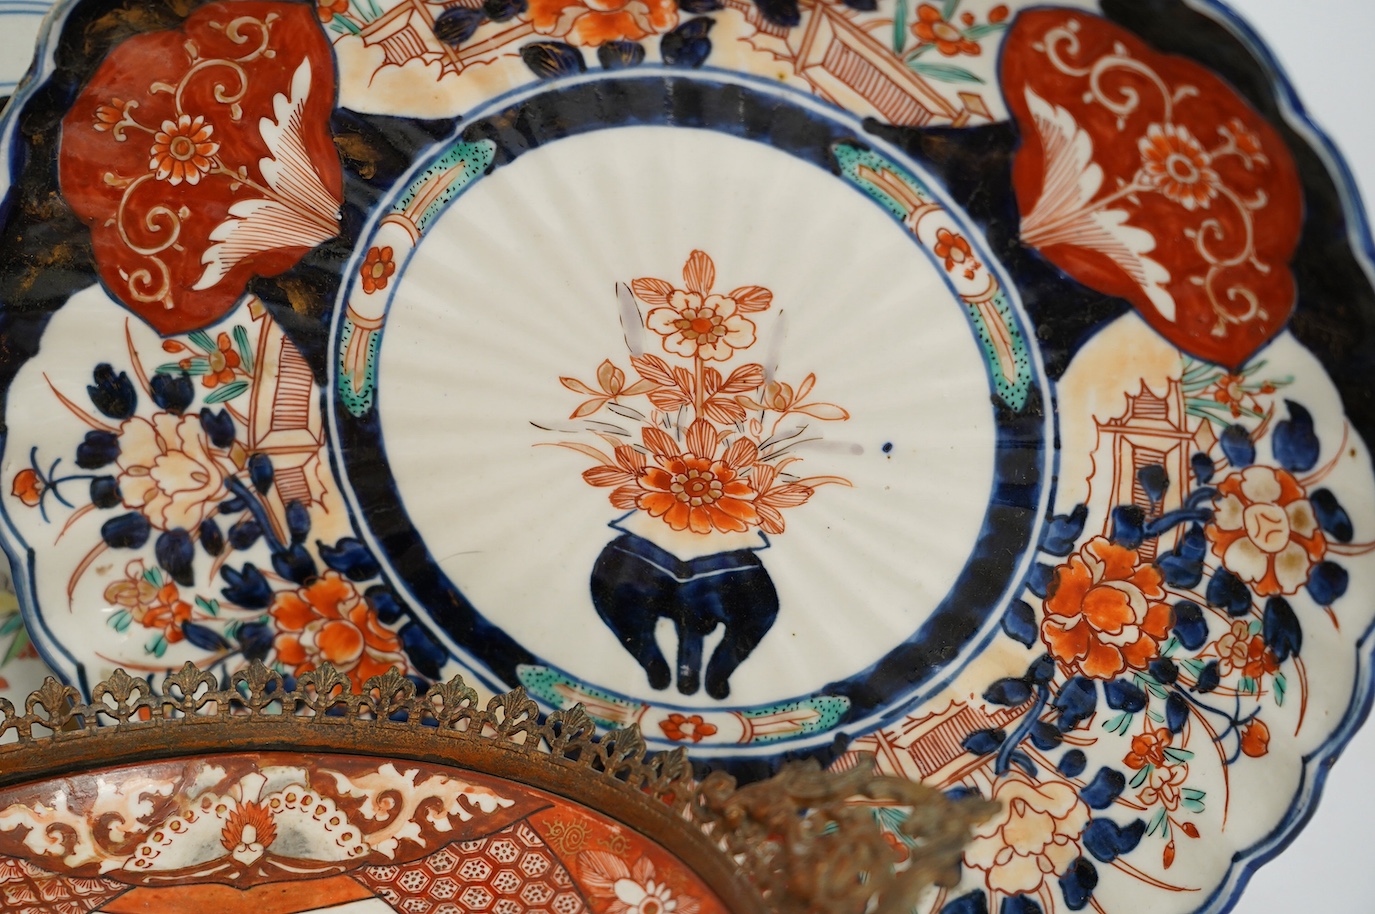 Five Japanese Imari dishes and a Kutani gilt metal mounted bowl, Meiji period, largest 35cm. Condition - poor to fair